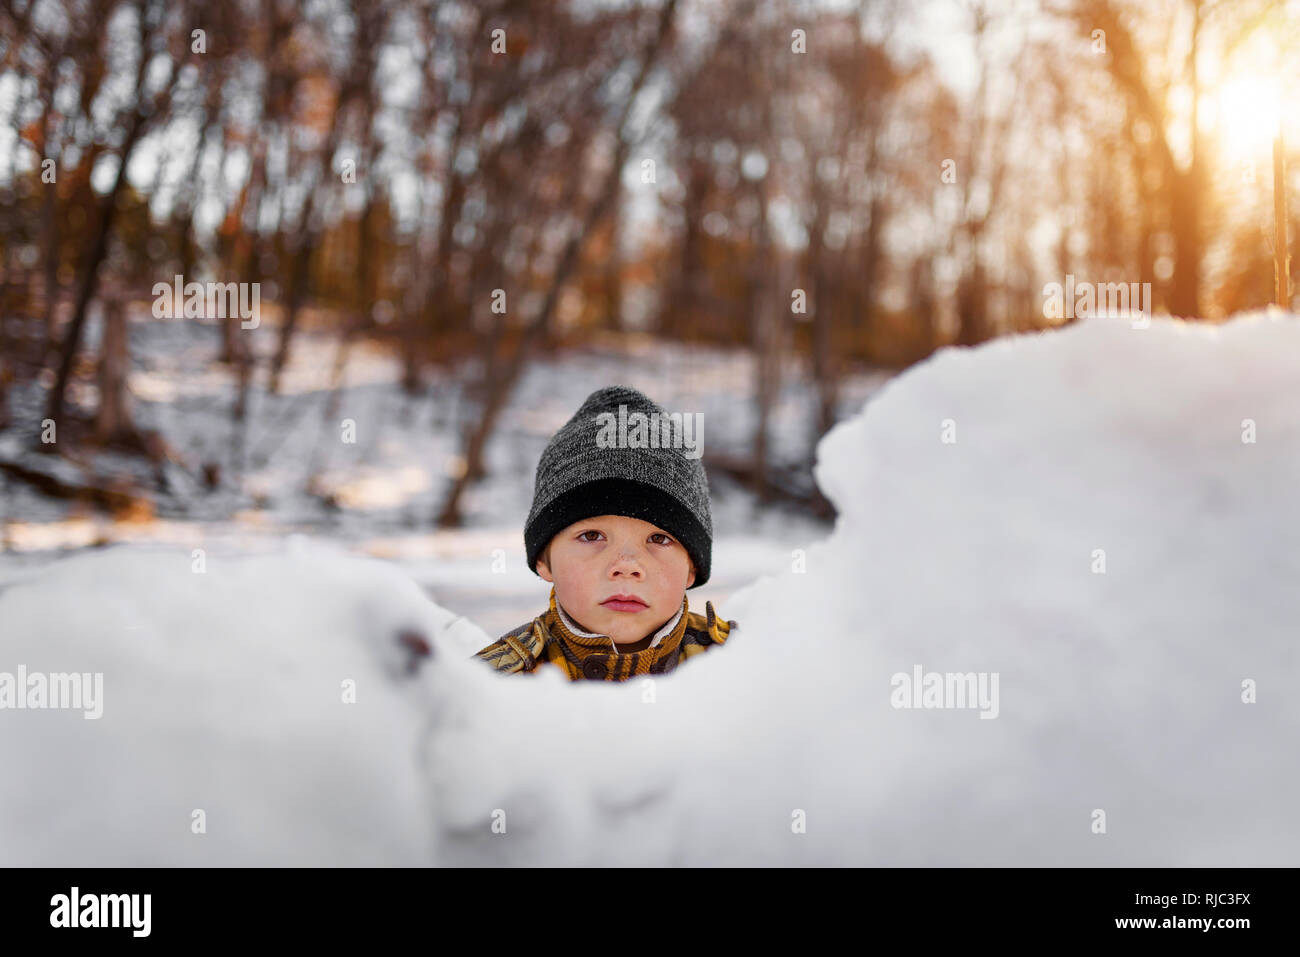 Portrait of a boy standing in a snow fort, United States Stock Photo